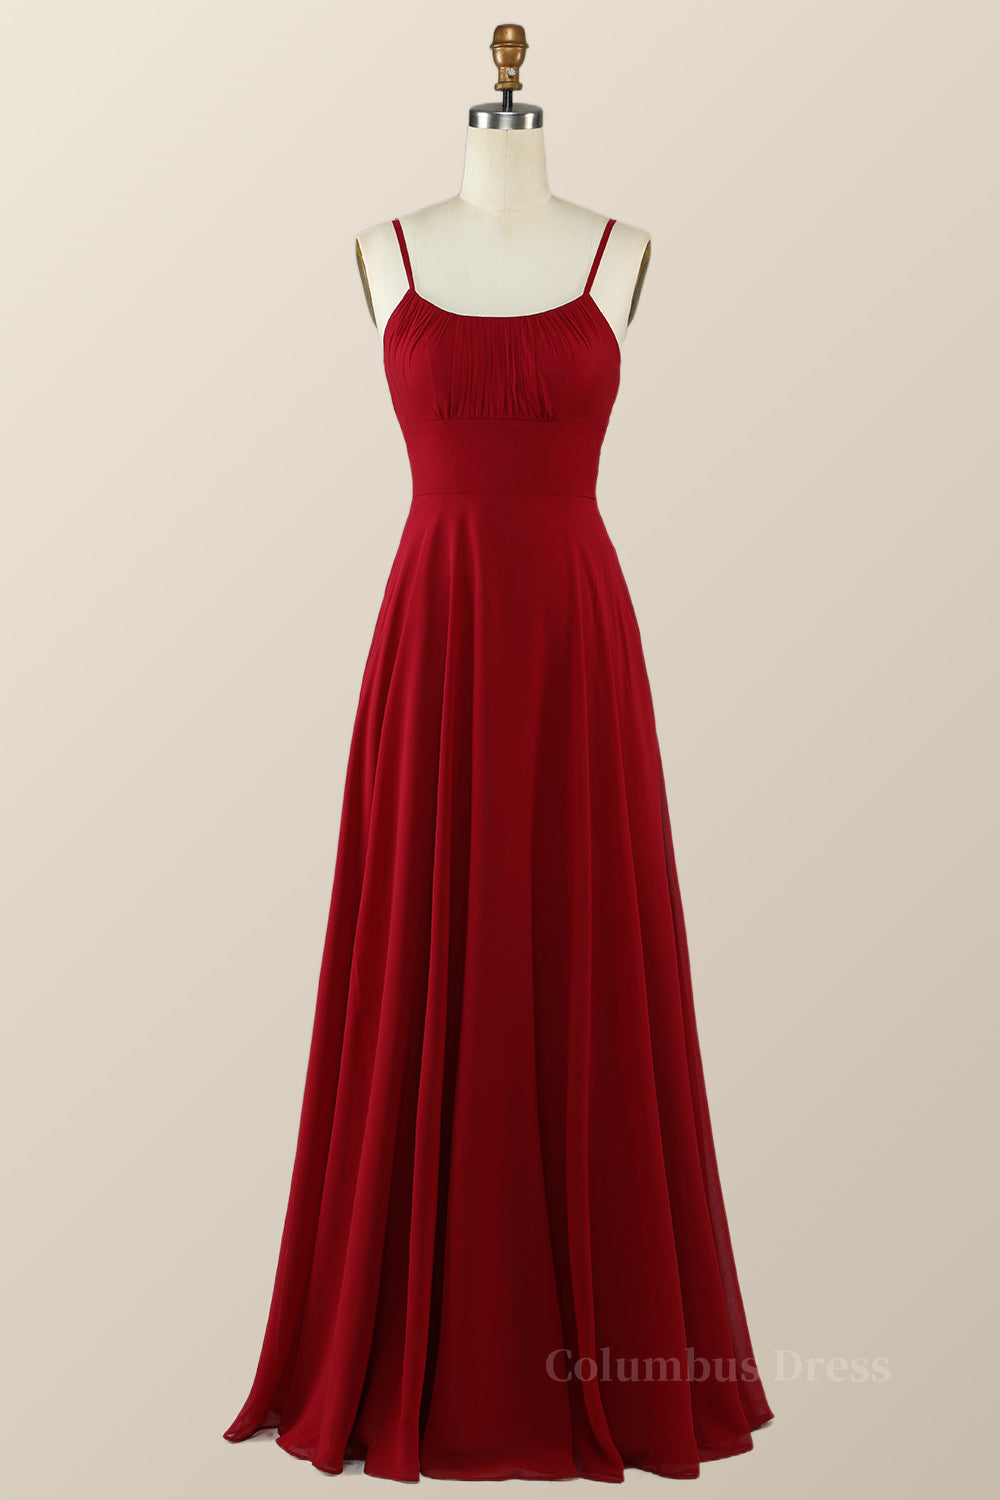 Straps Wine Red Chiffon A-line Long Corset Bridesmaid Dress outfit, Party Dress Inspiration